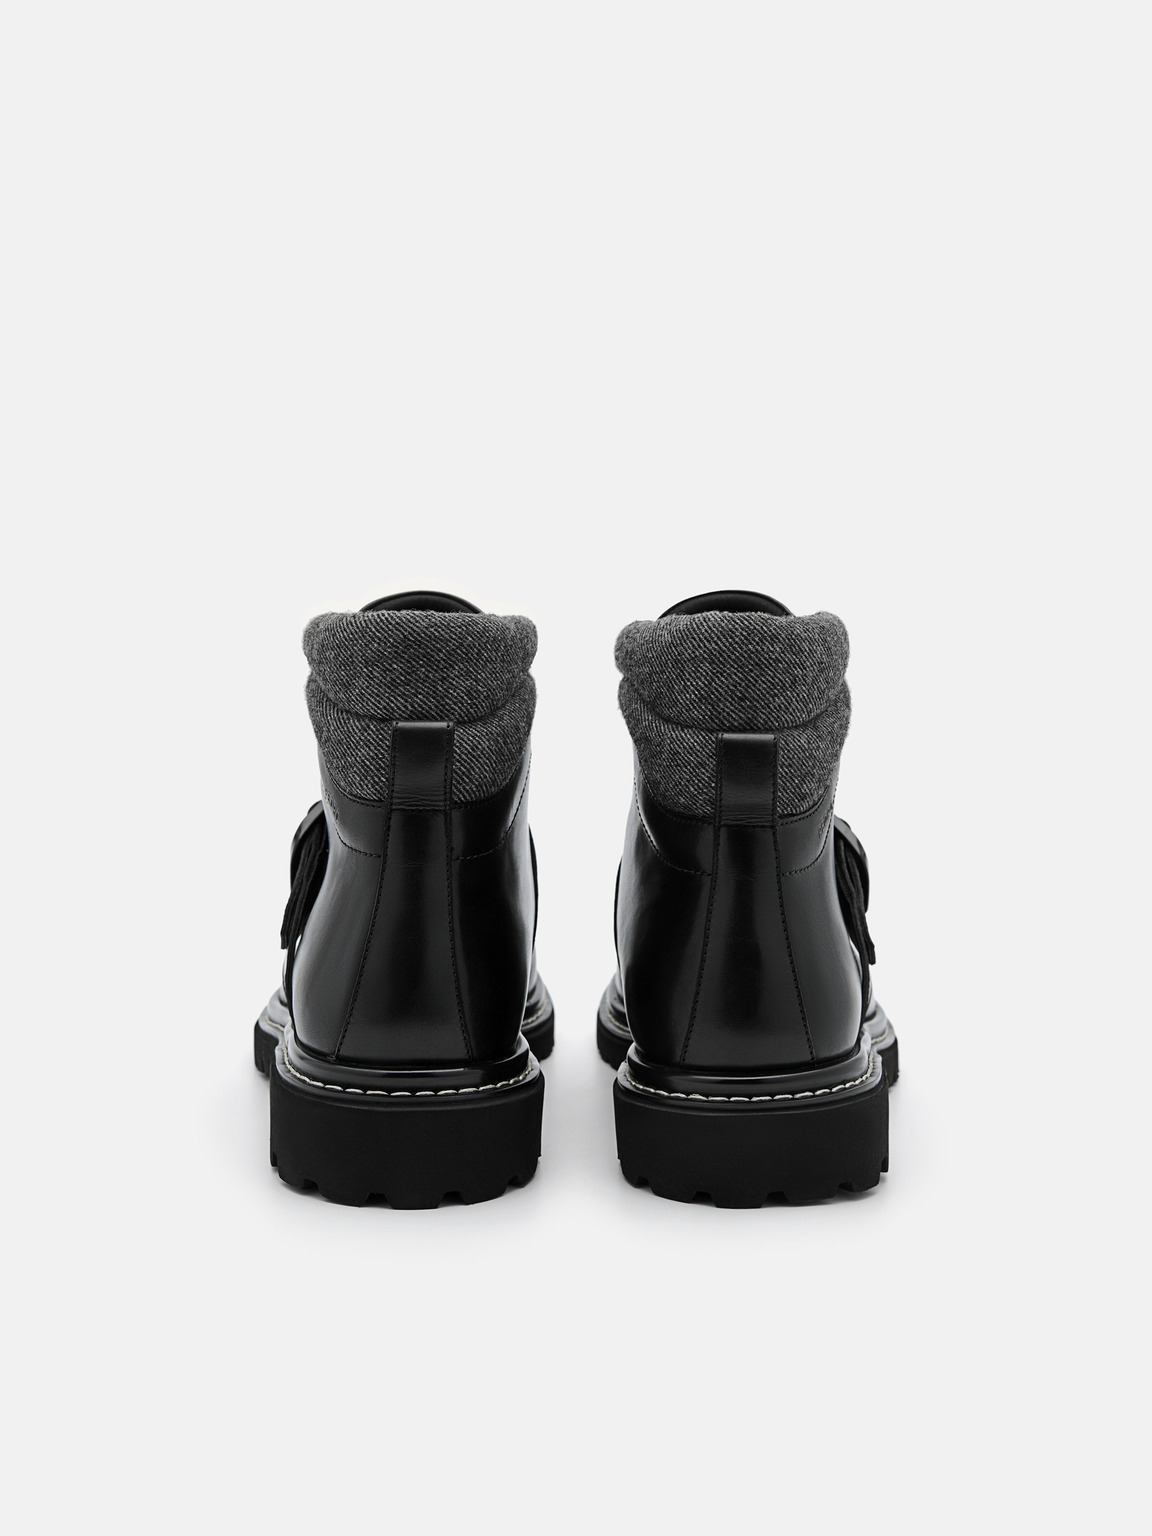 Helix Leather Boots, Black